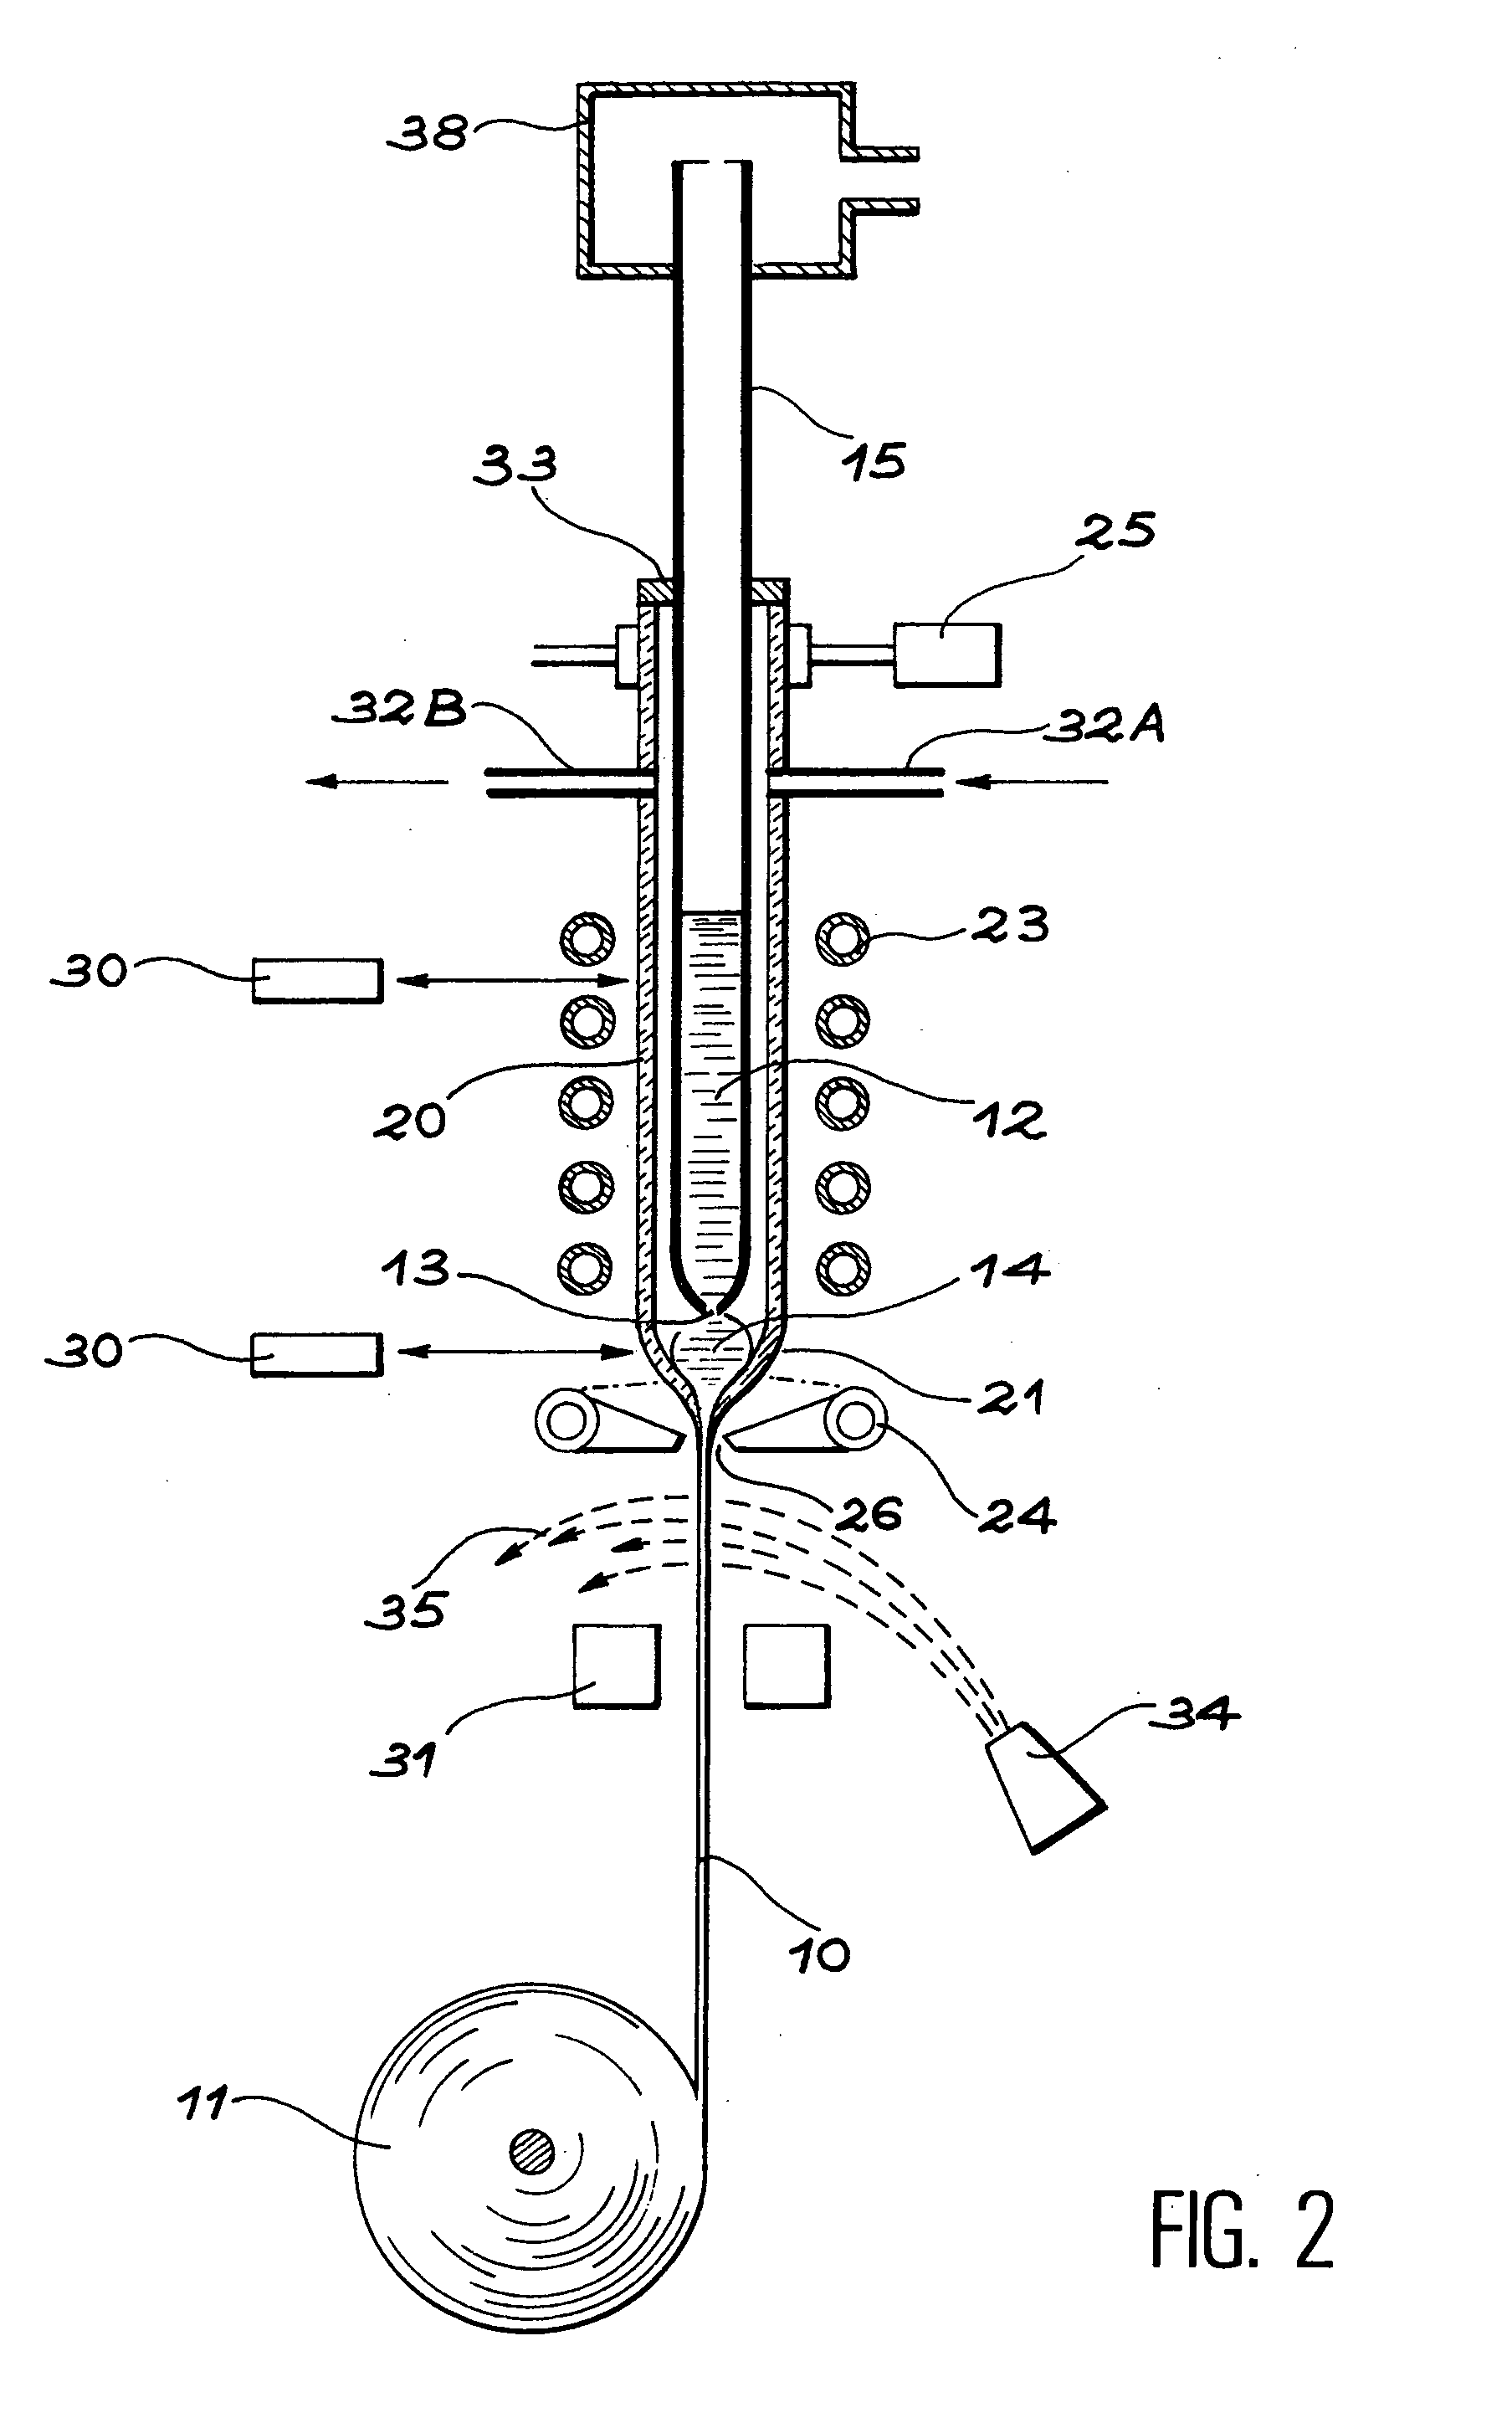 Method and device for continuous production of glass-sheathed metal wires